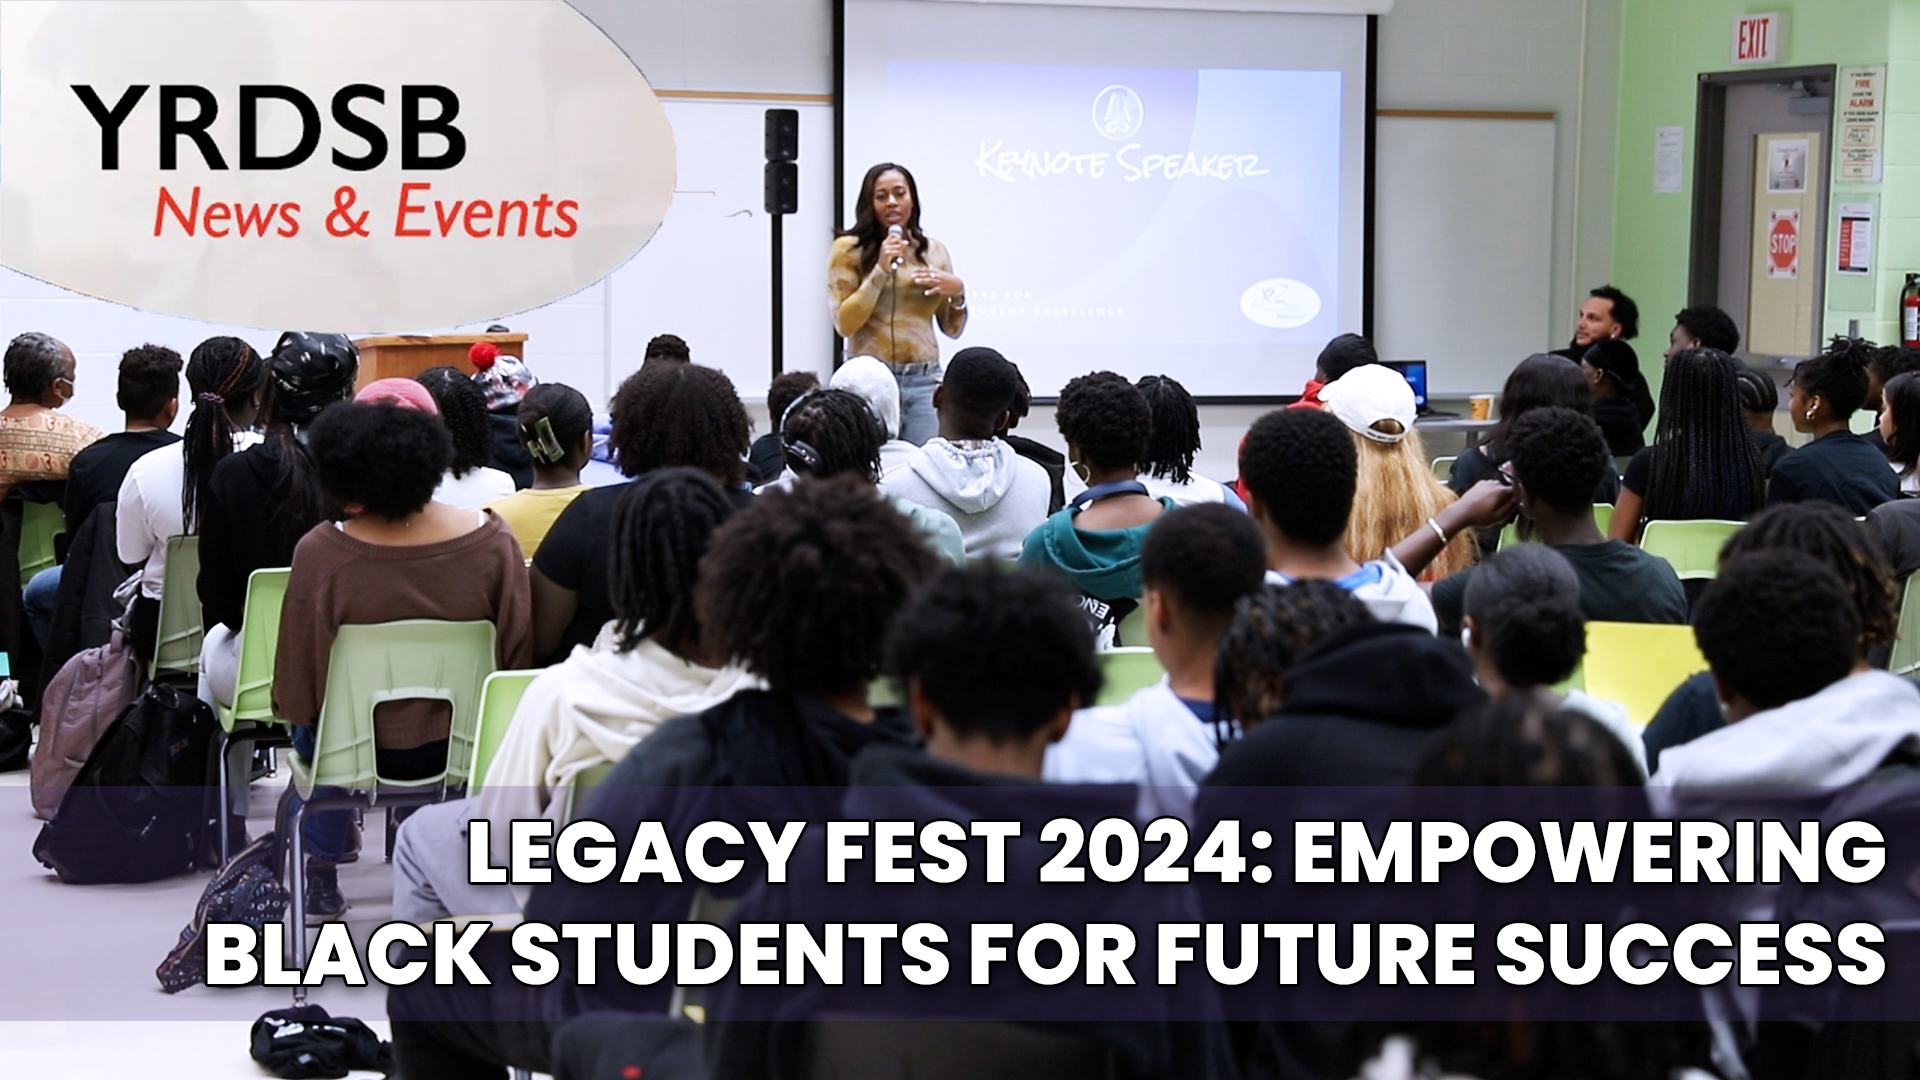 YRDSB news and events - Legacy fest 2024: Empowering black students for future success